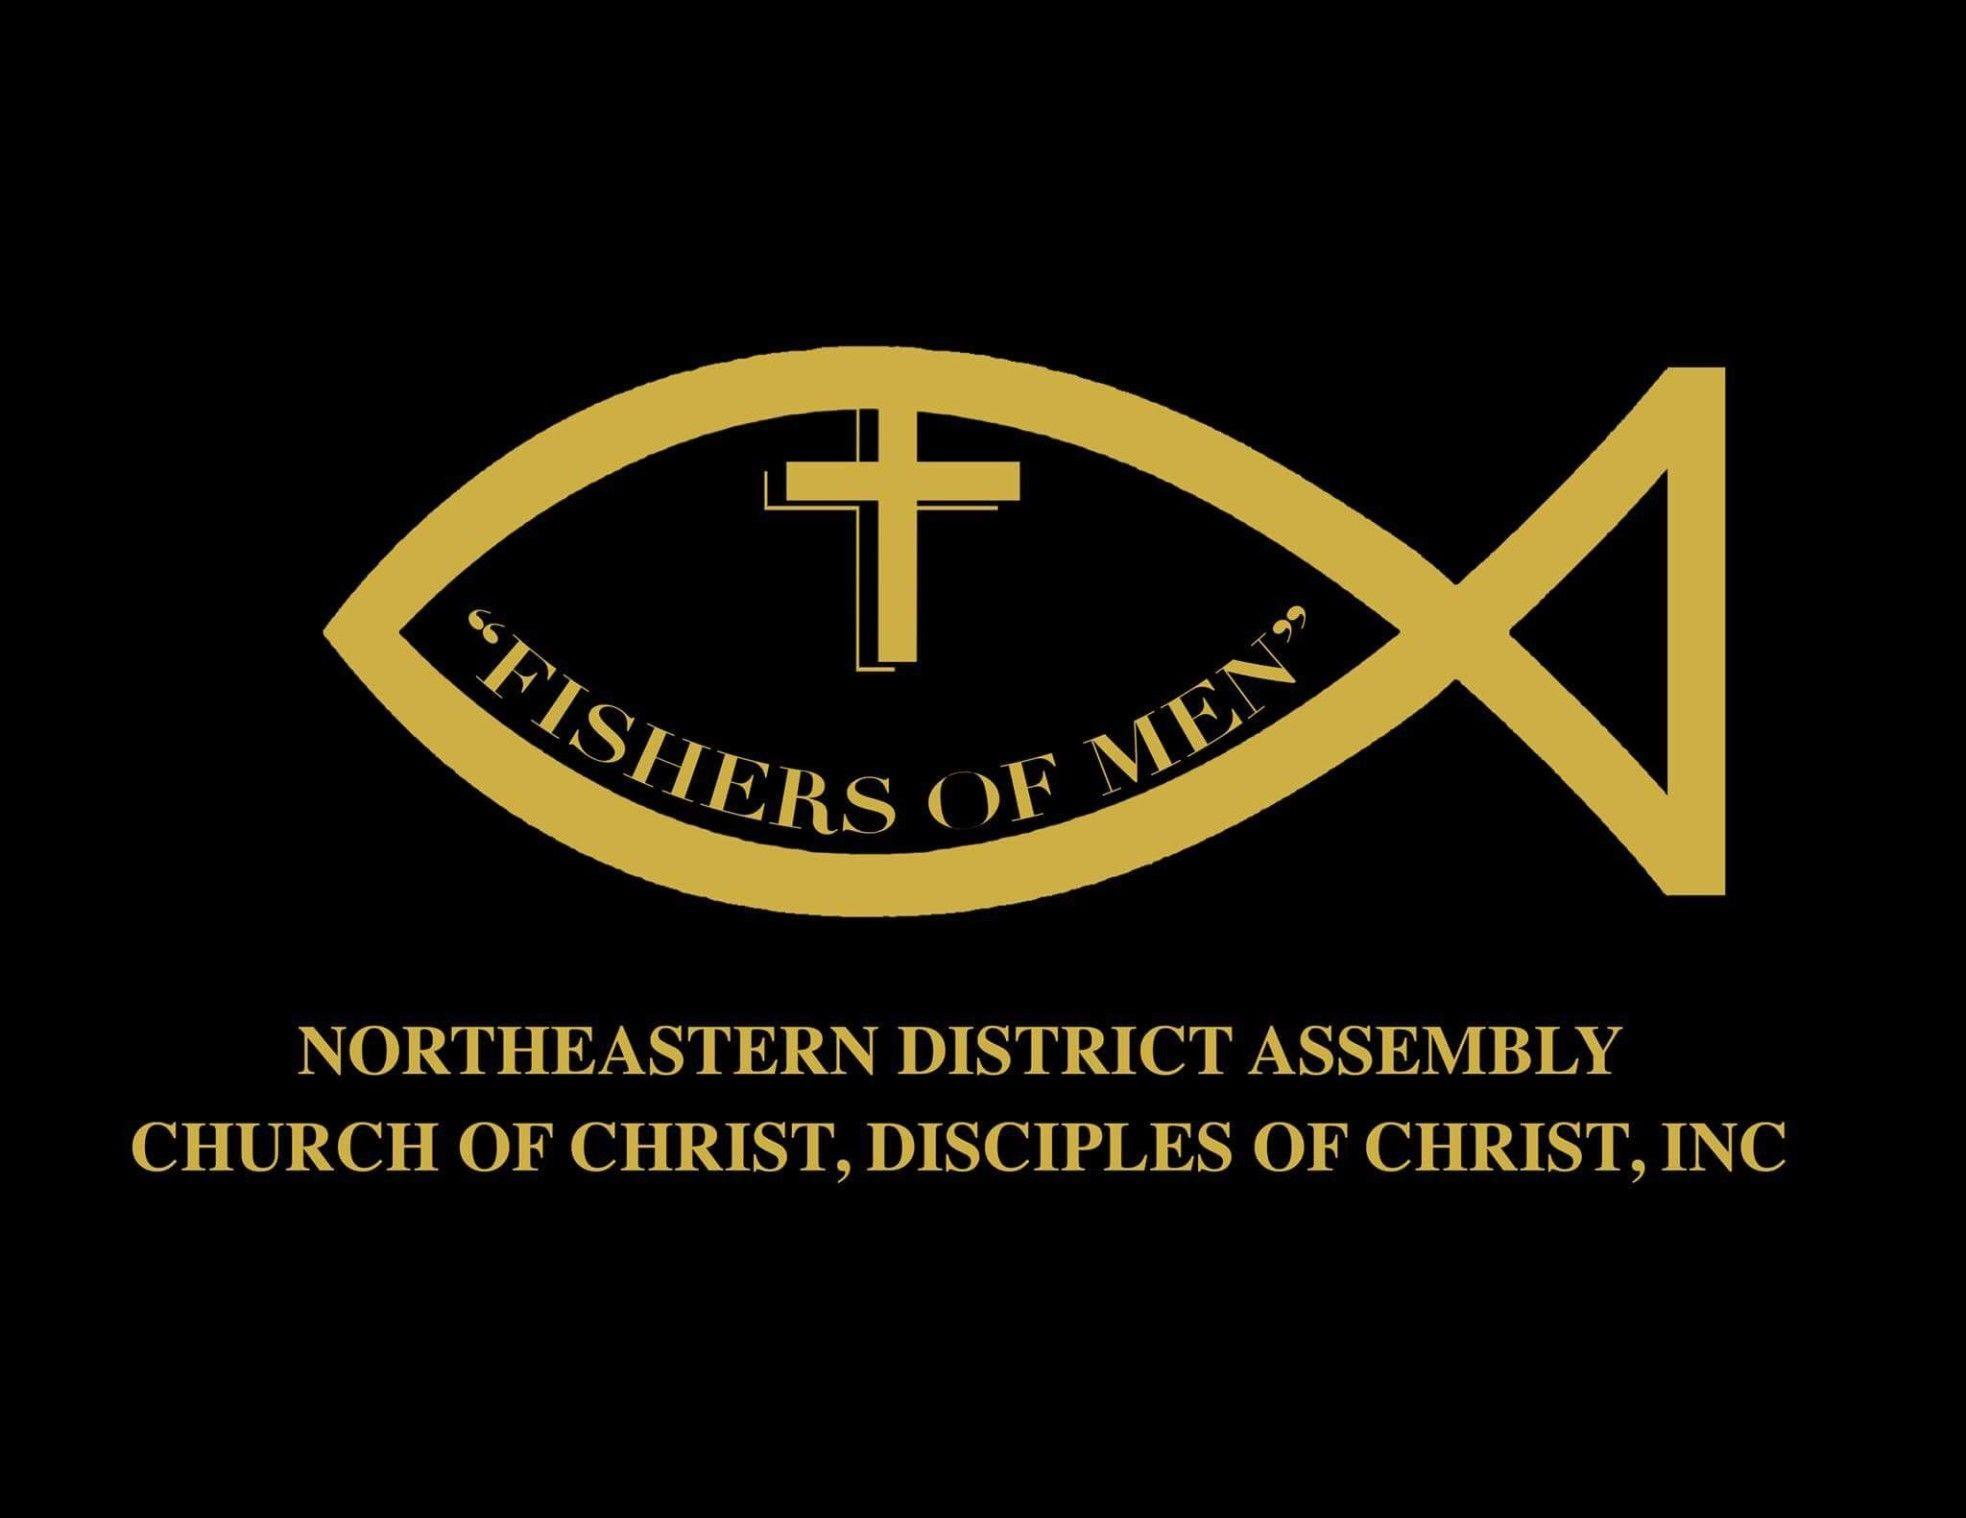 Christian Disciples Logo - The Northeastern District Assembly Church of Christ, Disciples of ...